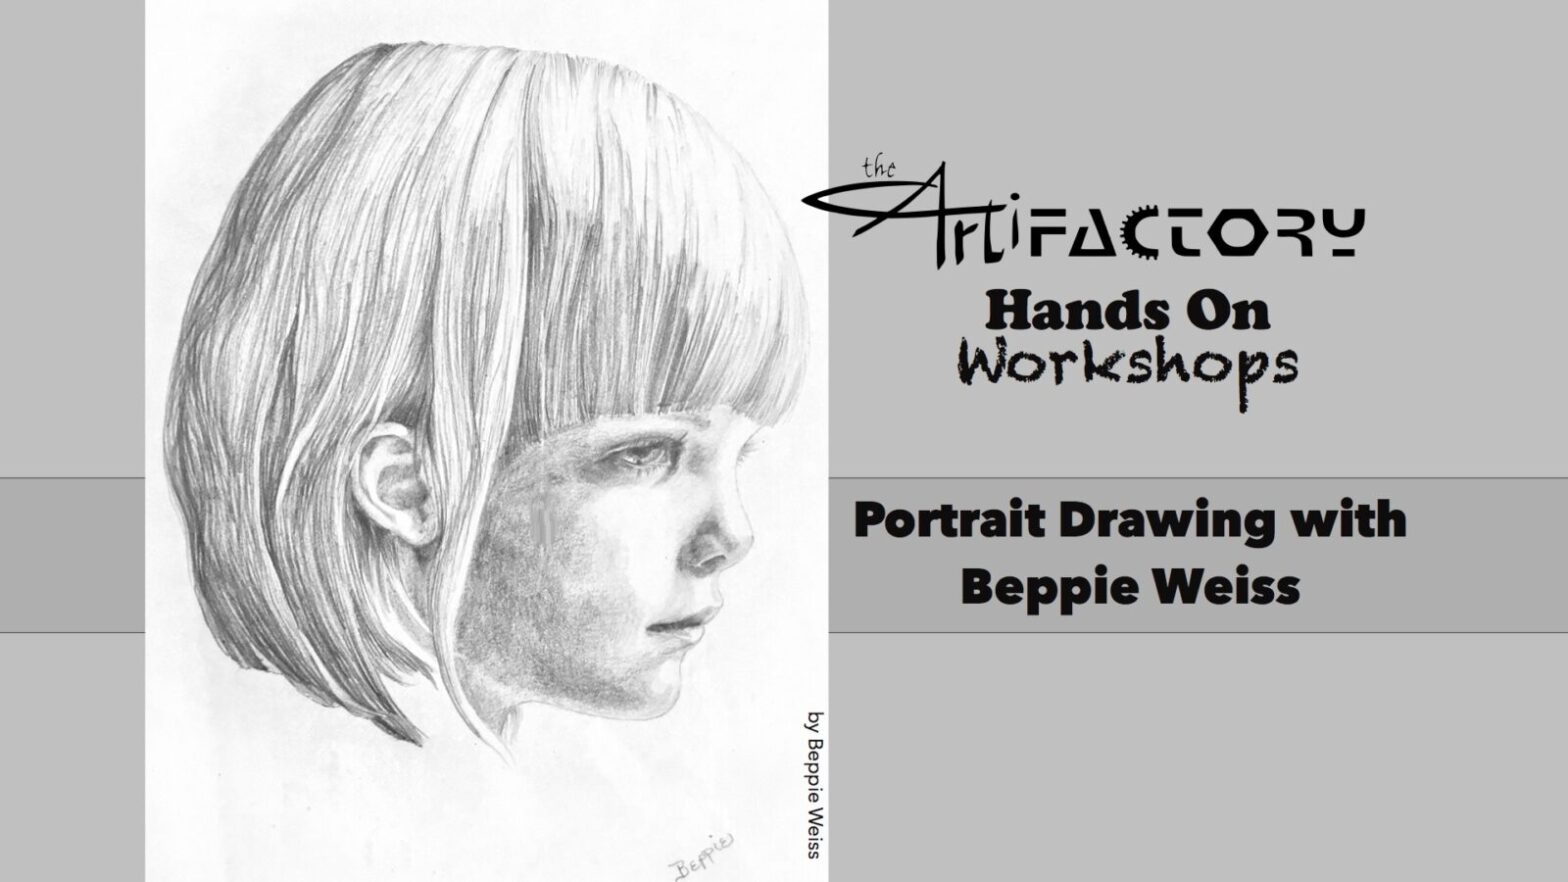 Portrait Drawing with Beppie Weiss